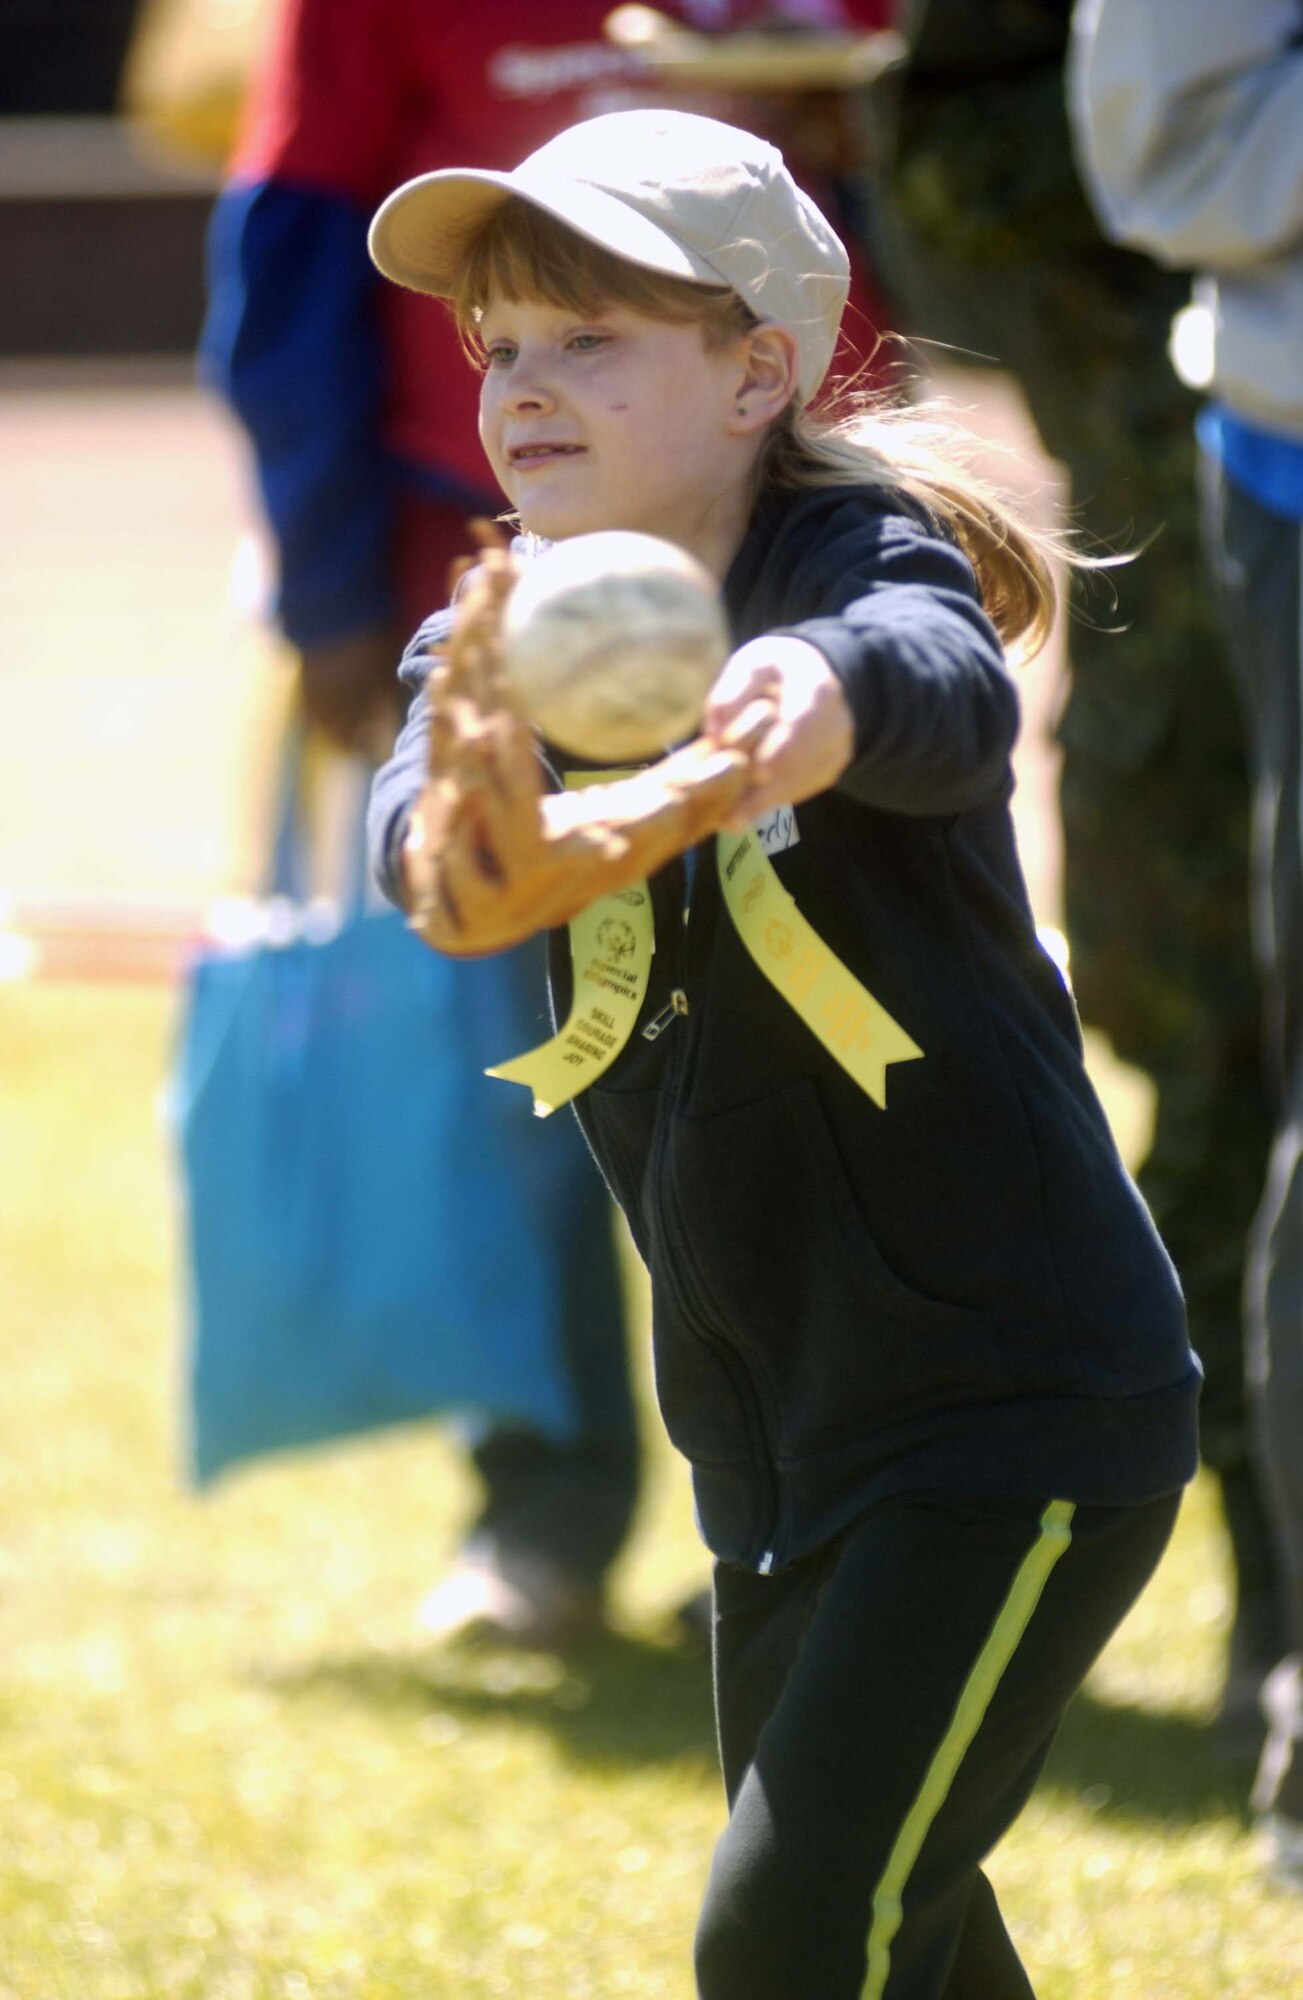 Kimberly Raab, 8, from the Westpfalz Schule in Landstuhl, catches a softball during the competitive fielding event at the 2007 U.S. Army Garrison Kaiserslautern’s Special Olympics Spring Games at the Police Academy in Enkenbach-Alsenborn. Photo by Christine June 